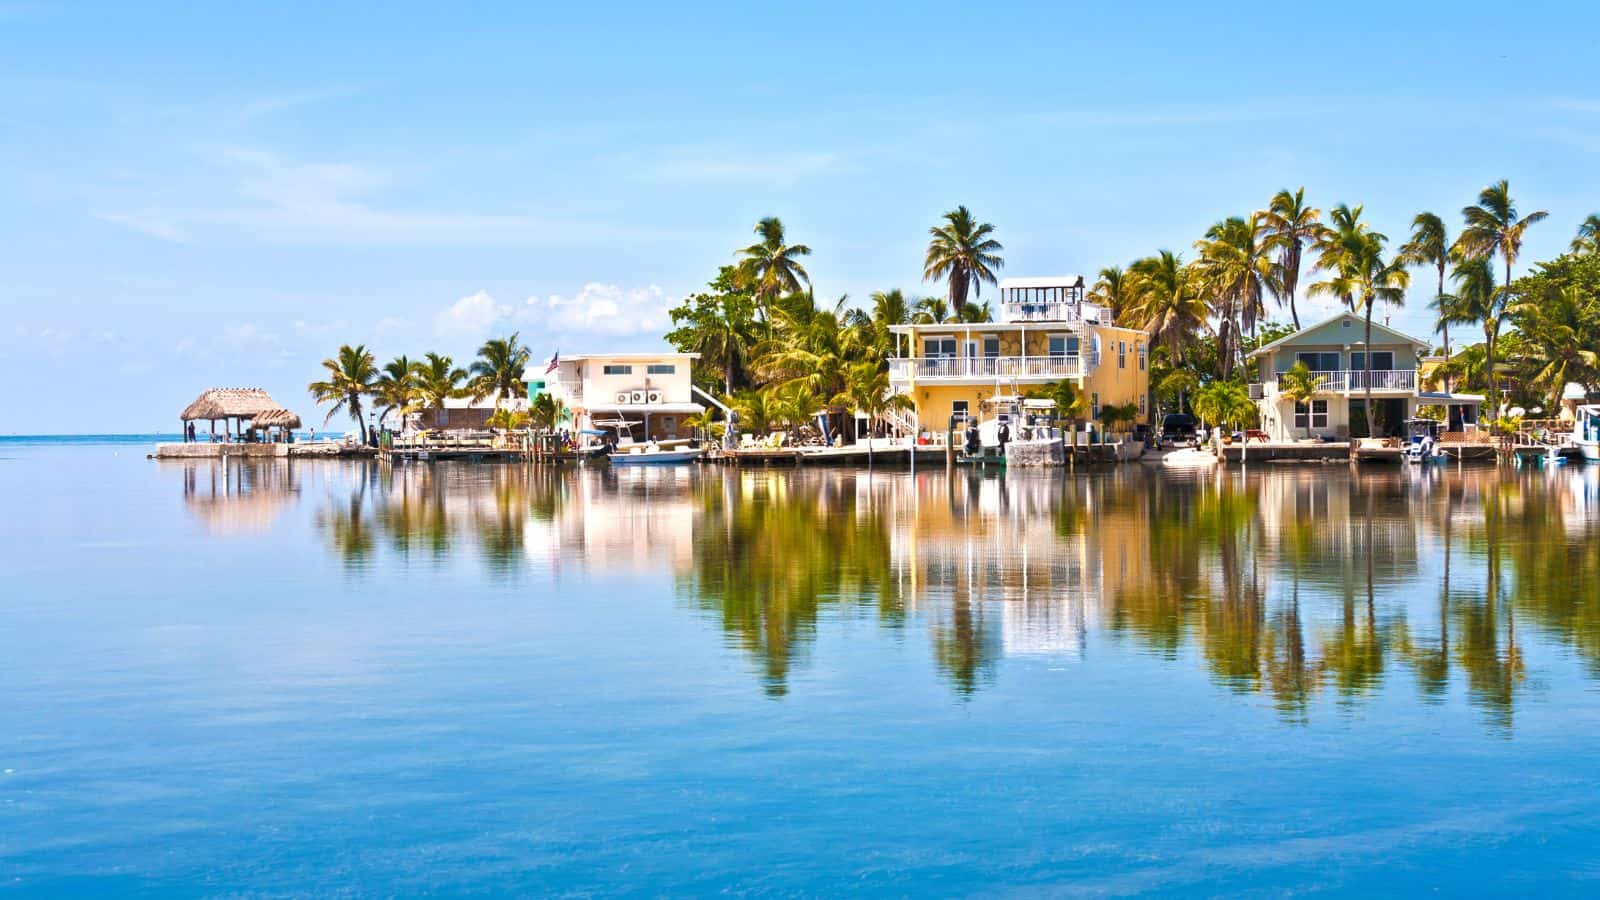 Homes in the Florida Keys